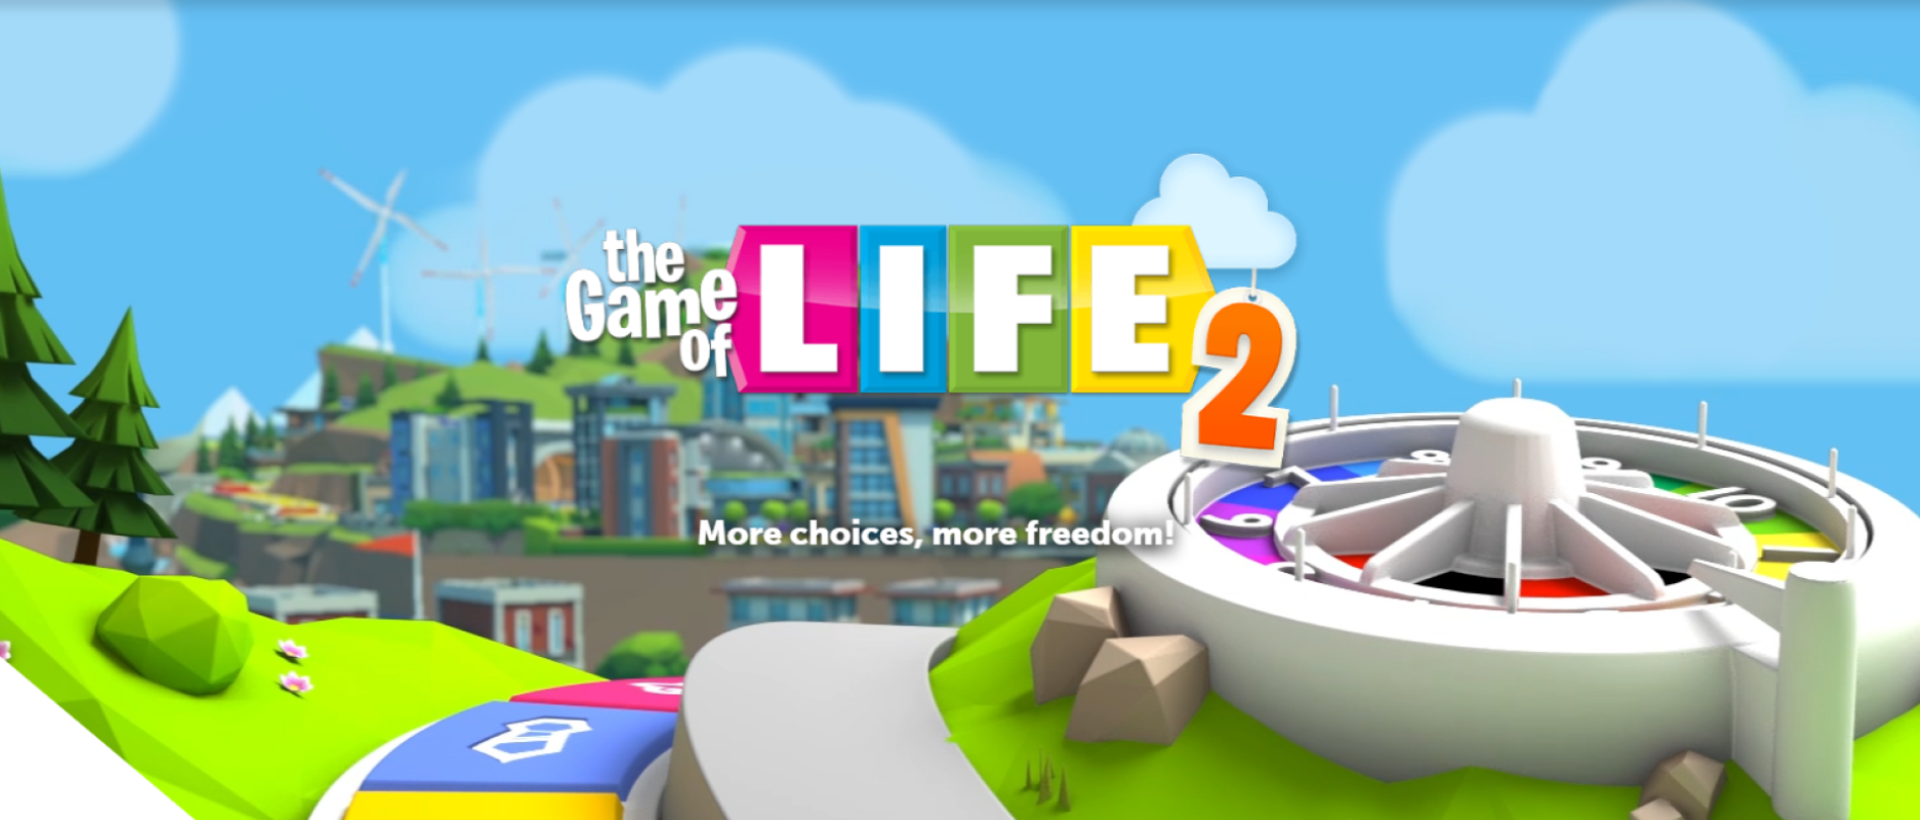 the game of life online with friends